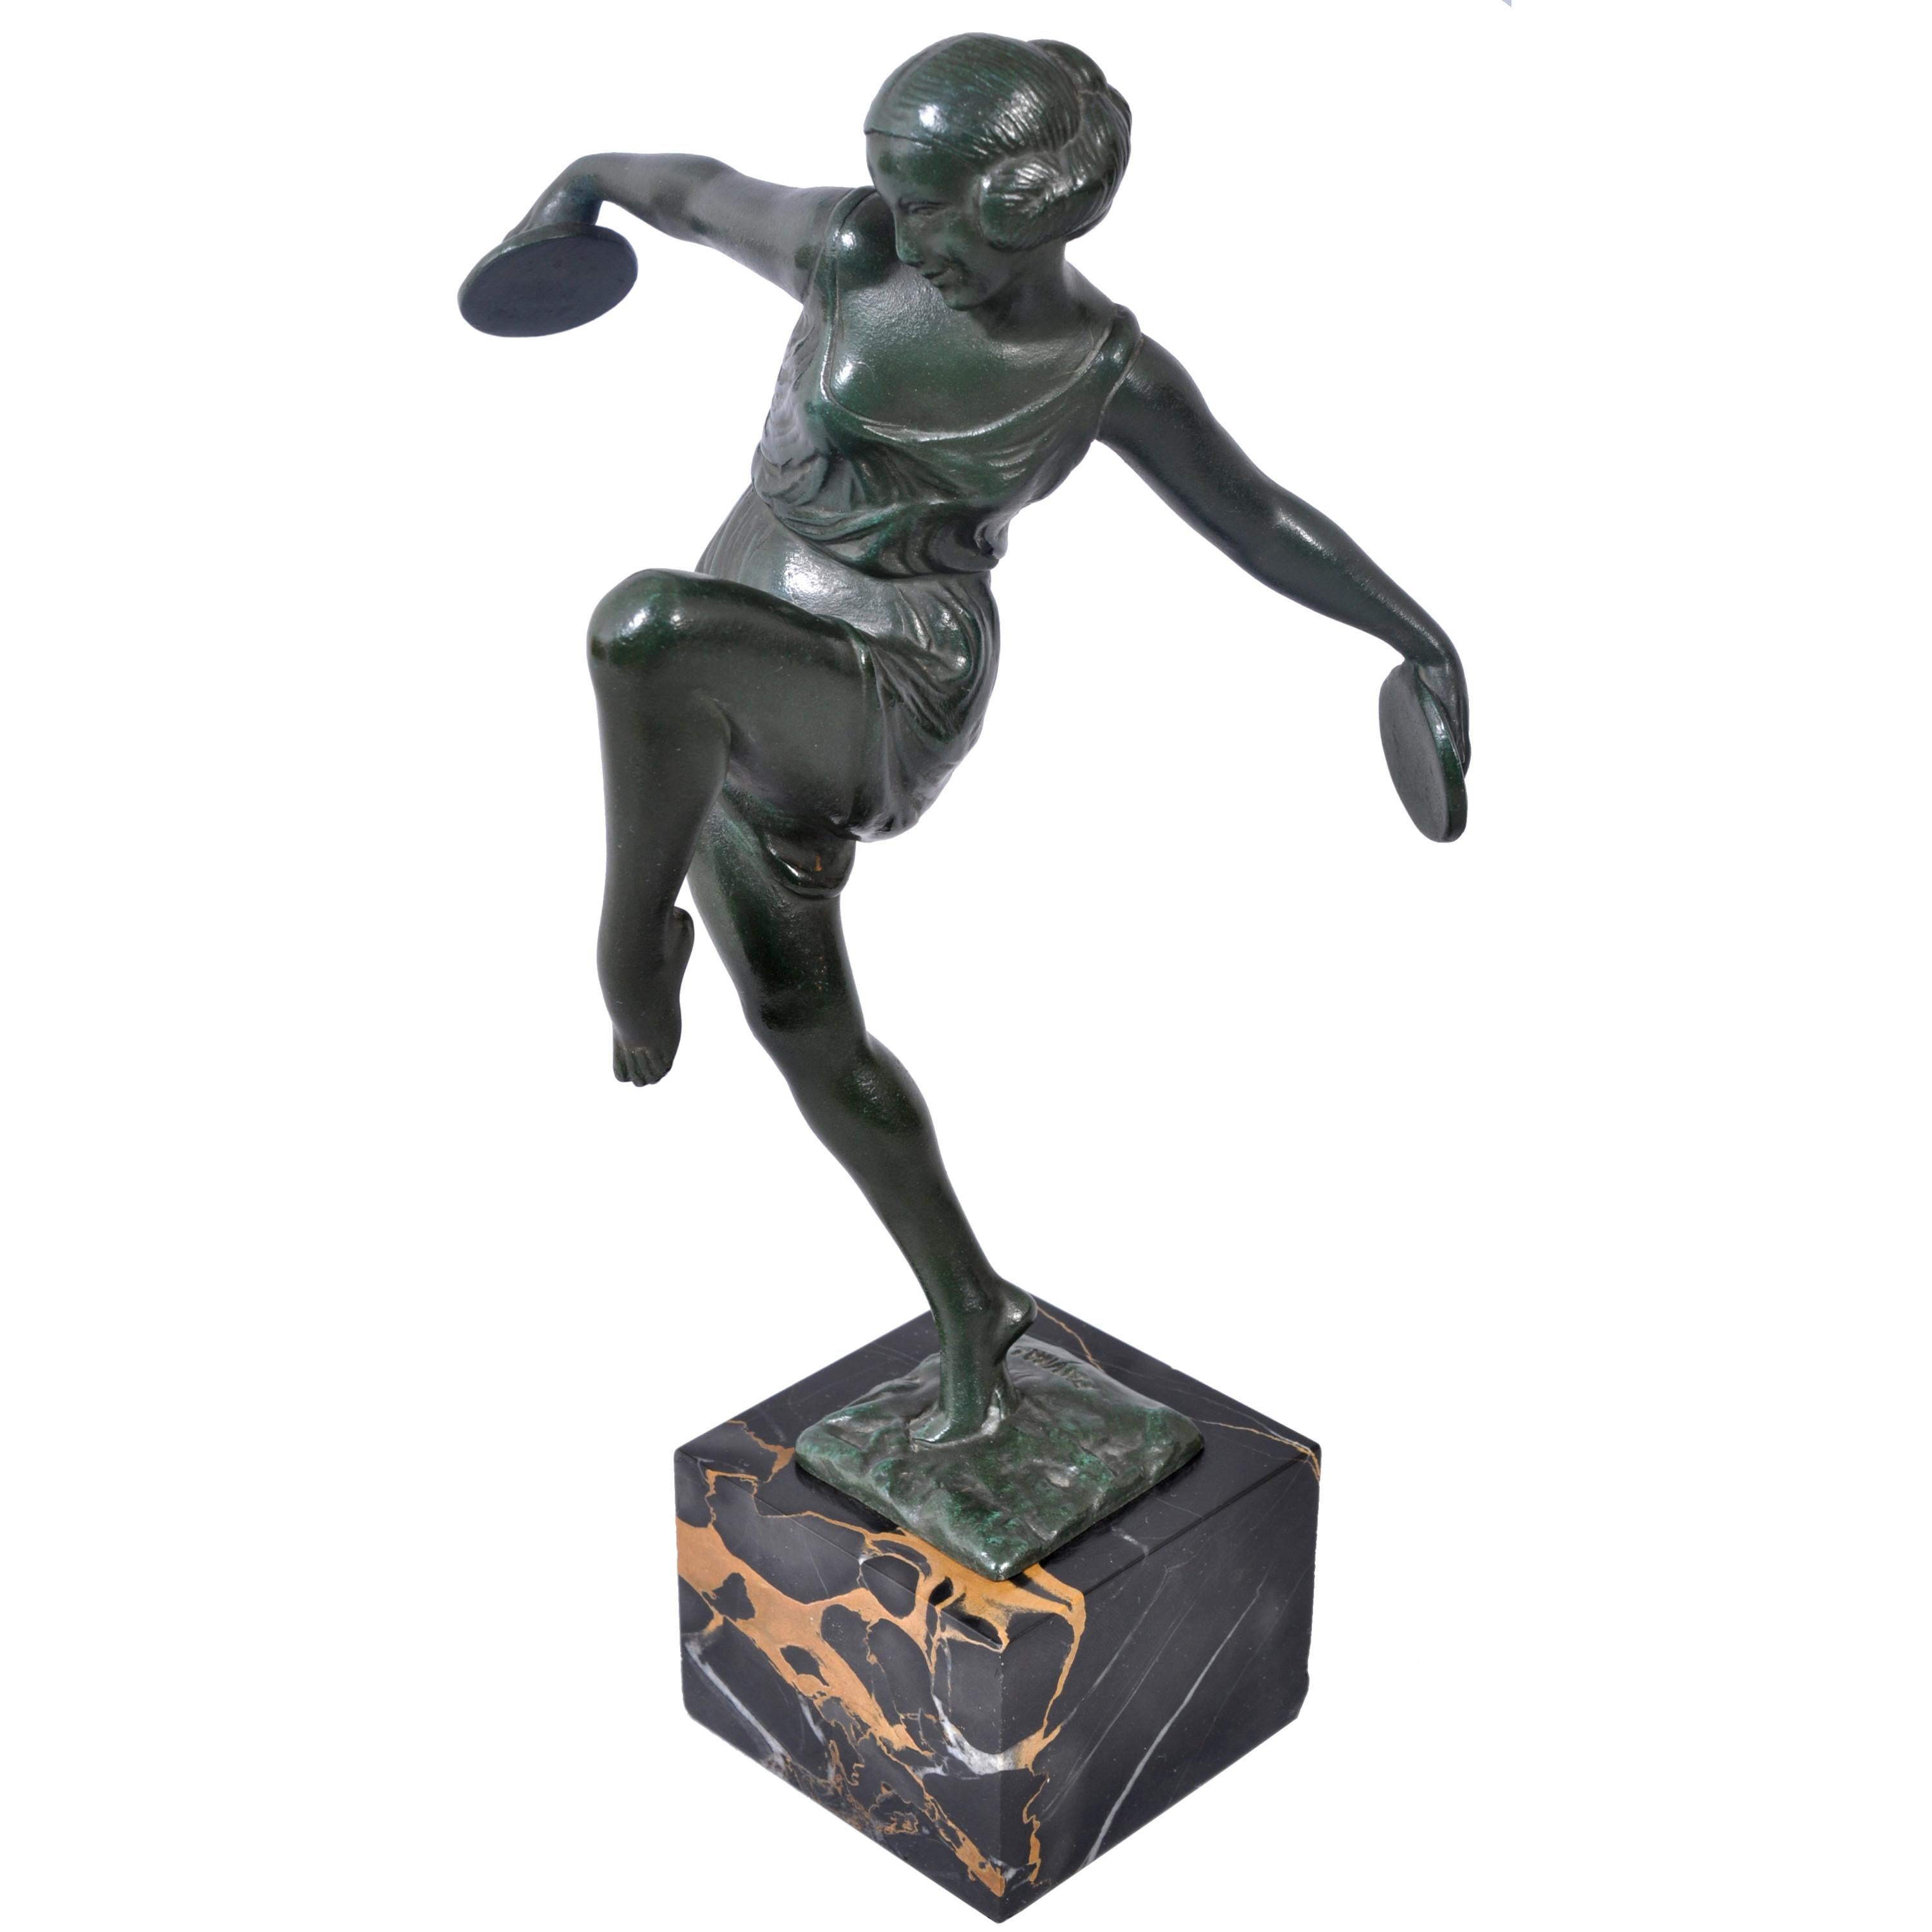 A good, original, Art Deco bronze statue by Pierre Le Faguays (1892-1962), circa 1925. The bronze depicting a lovely young lady dancing with cymbals, the bronze is raised on the original variagated marble base and is signed 